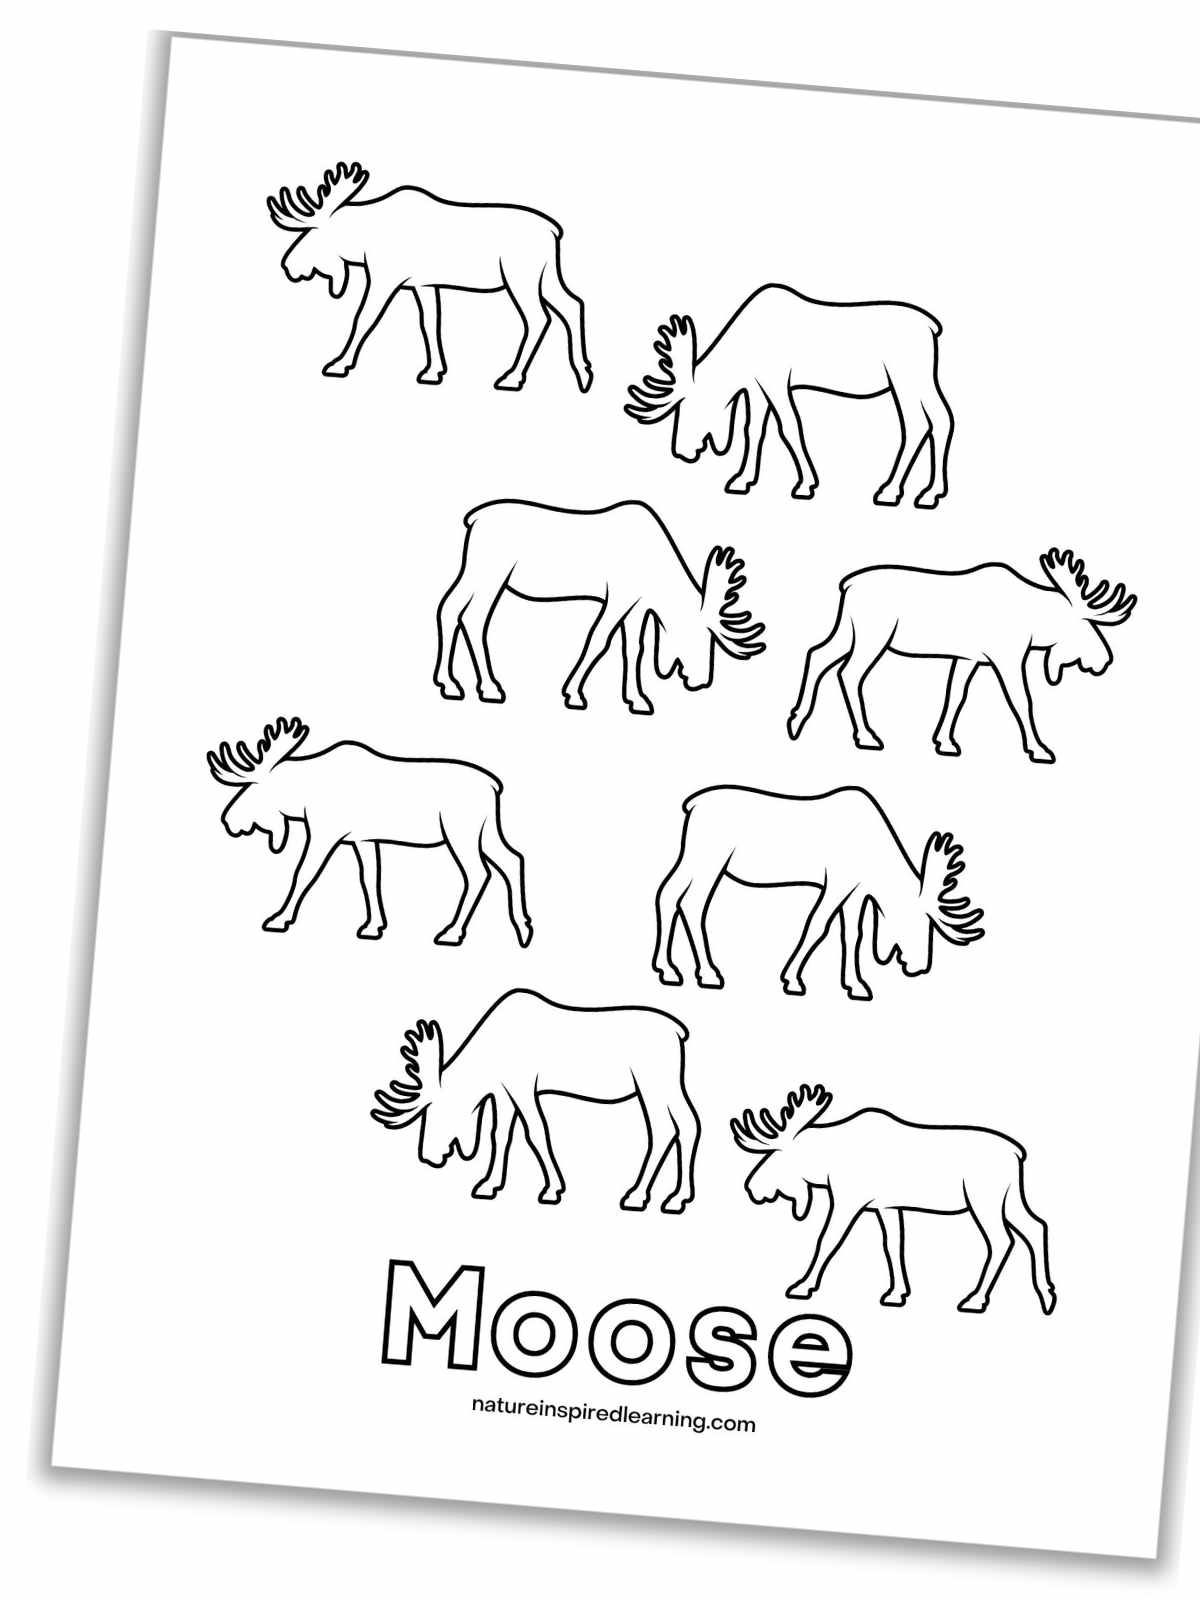 black and white printable with outlines of moose randomly arranged with Moose in outline form at the bottom